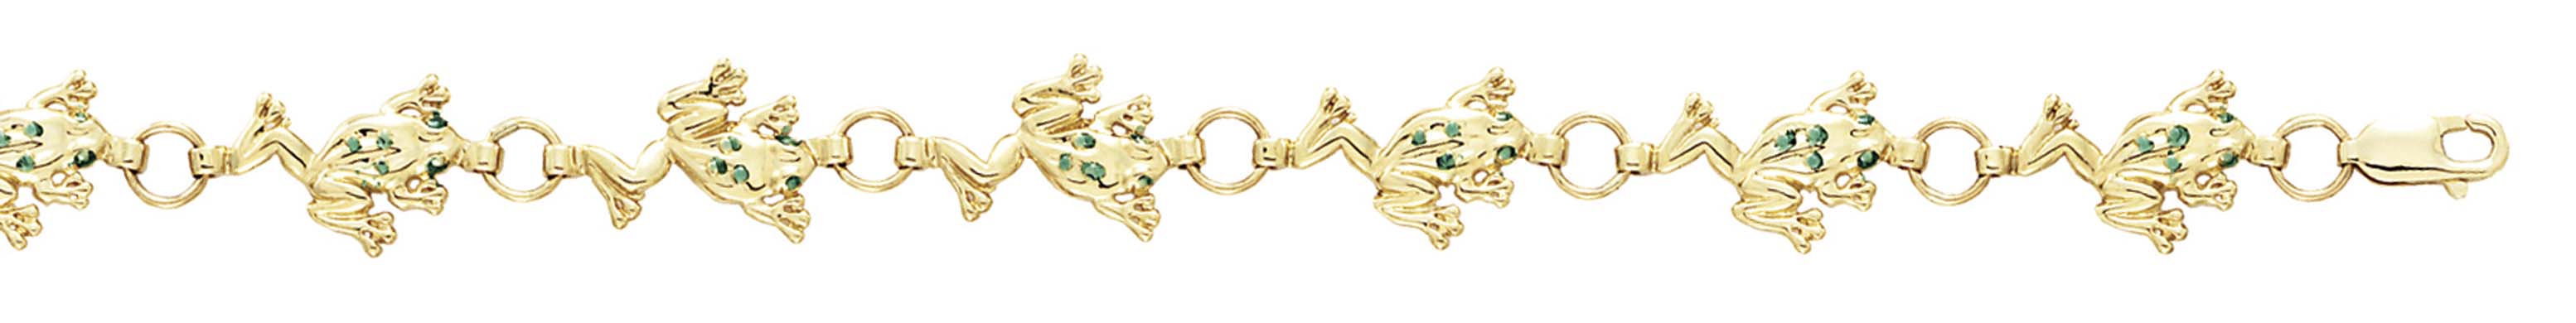 
14k Yellow Gold Small Frogs Bracelet - 7.25 Inch
